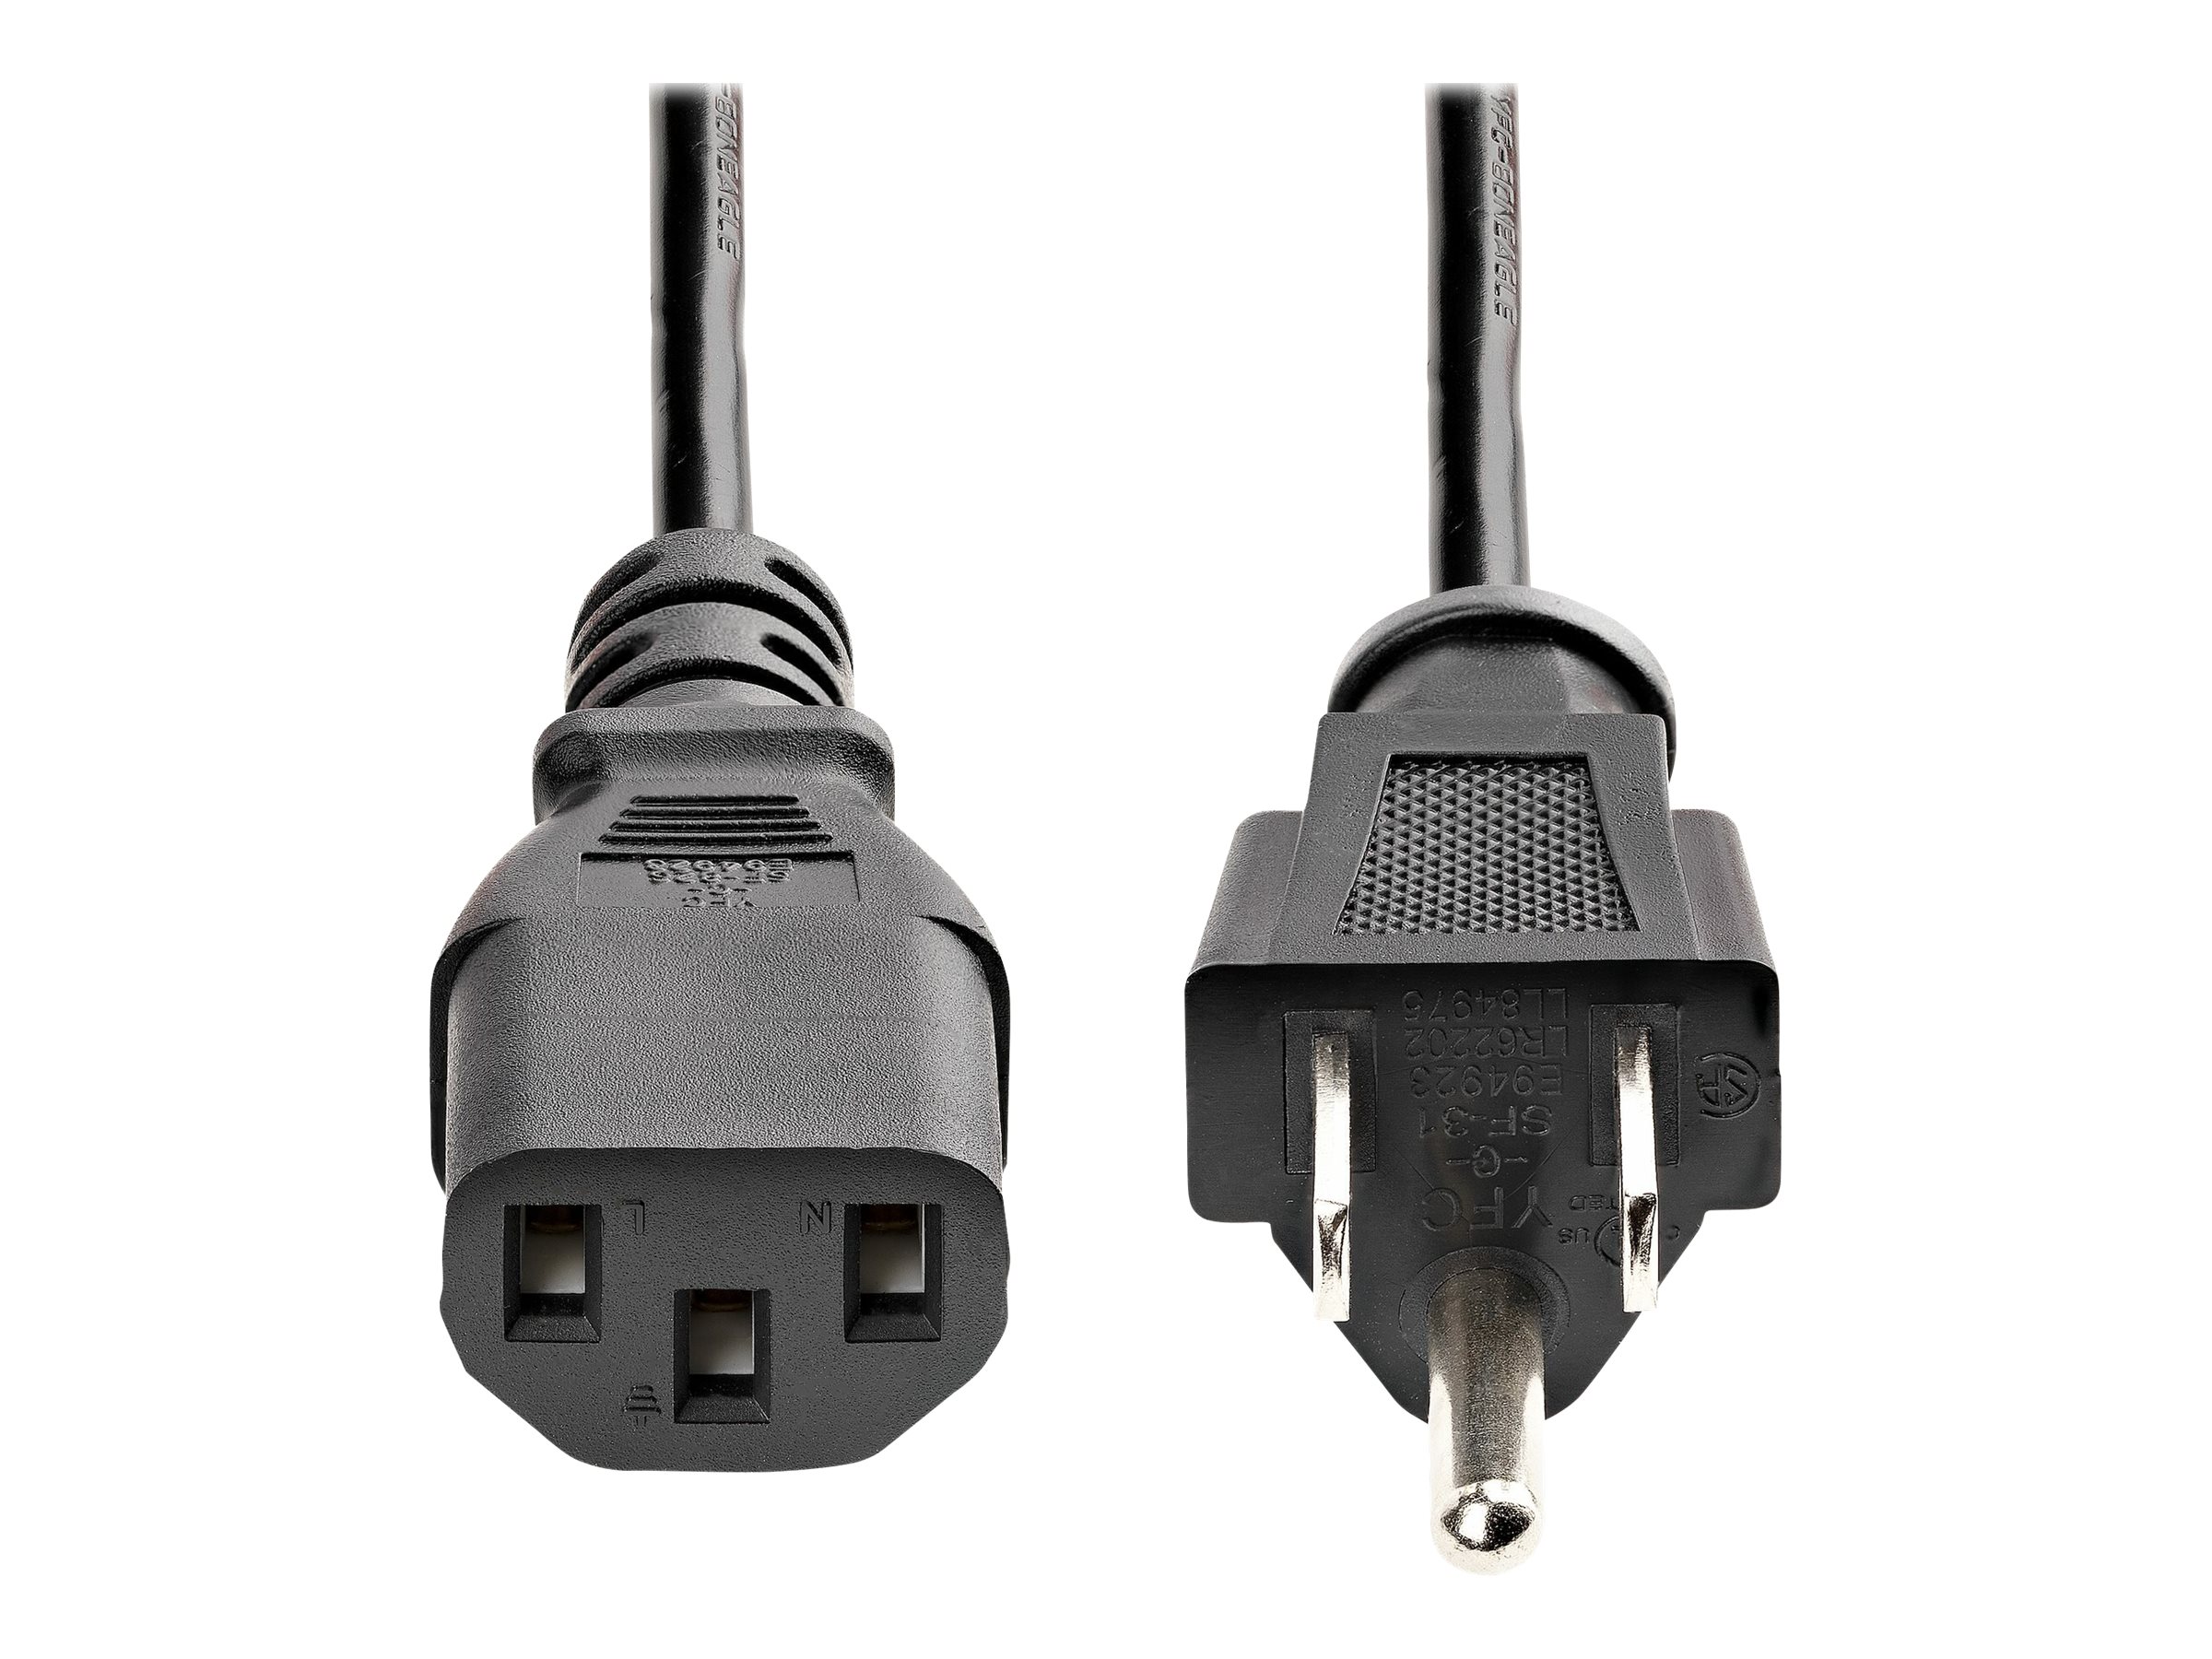 StarTech.com 3ft (1m) Heavy Duty Power Cord, NEMA 5-15P to C13 AC Power Cord, 15A 125V, 14AWG, Replacement Computer Power Cord, Monitor Power Cable, NEMA 5-15P to IEC 60320 C13 Power Cord